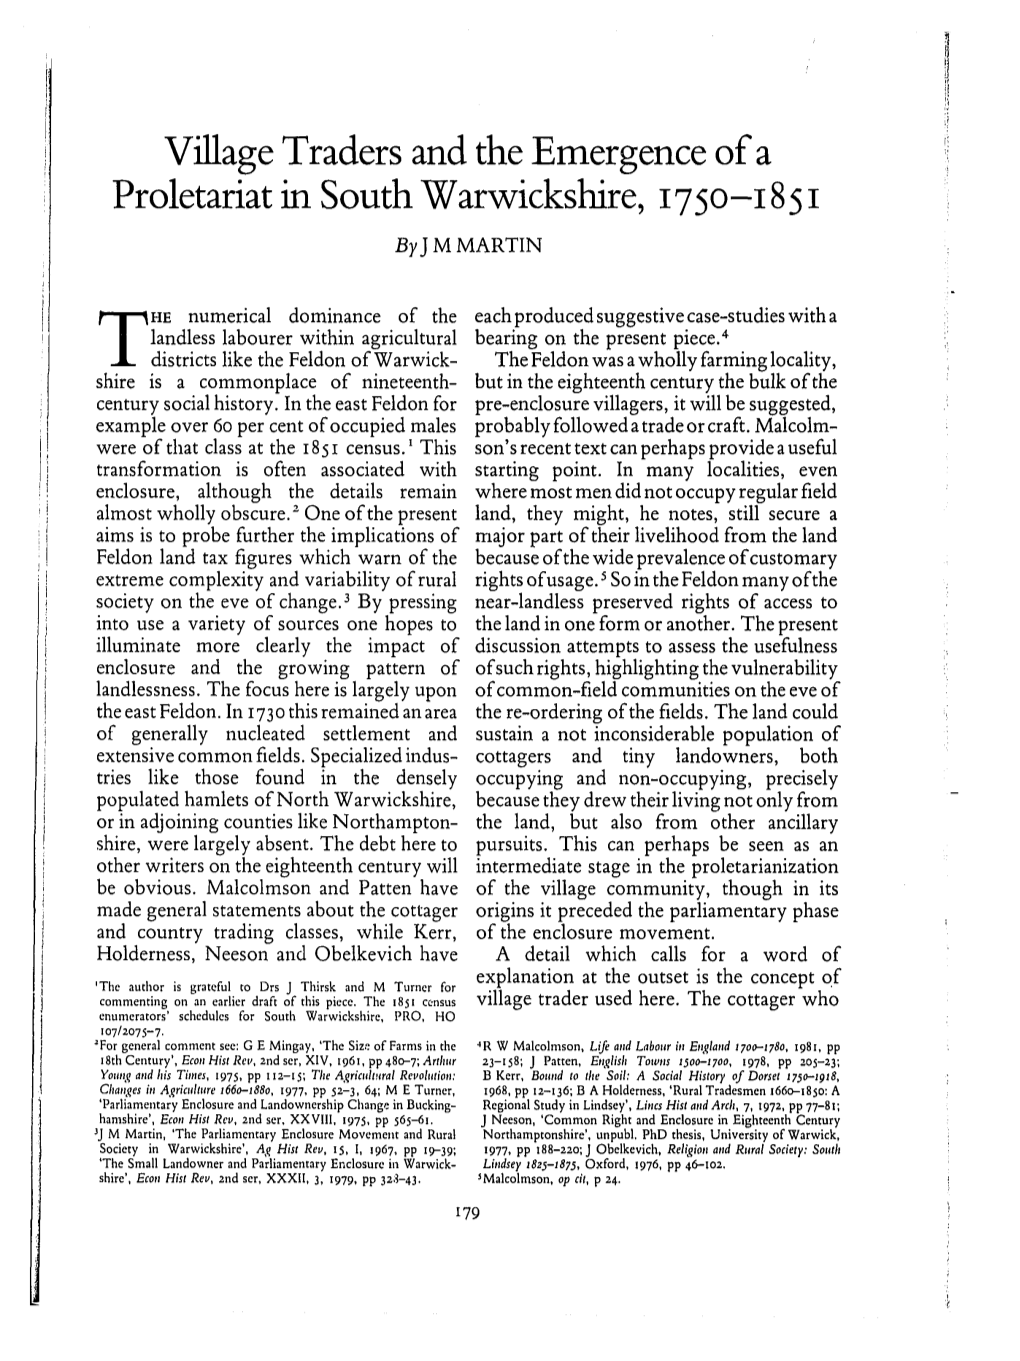 Village Traders and the Emergence of a Proletariat in South Warwickshire, 175 O-I 851 Byj M MARTIN